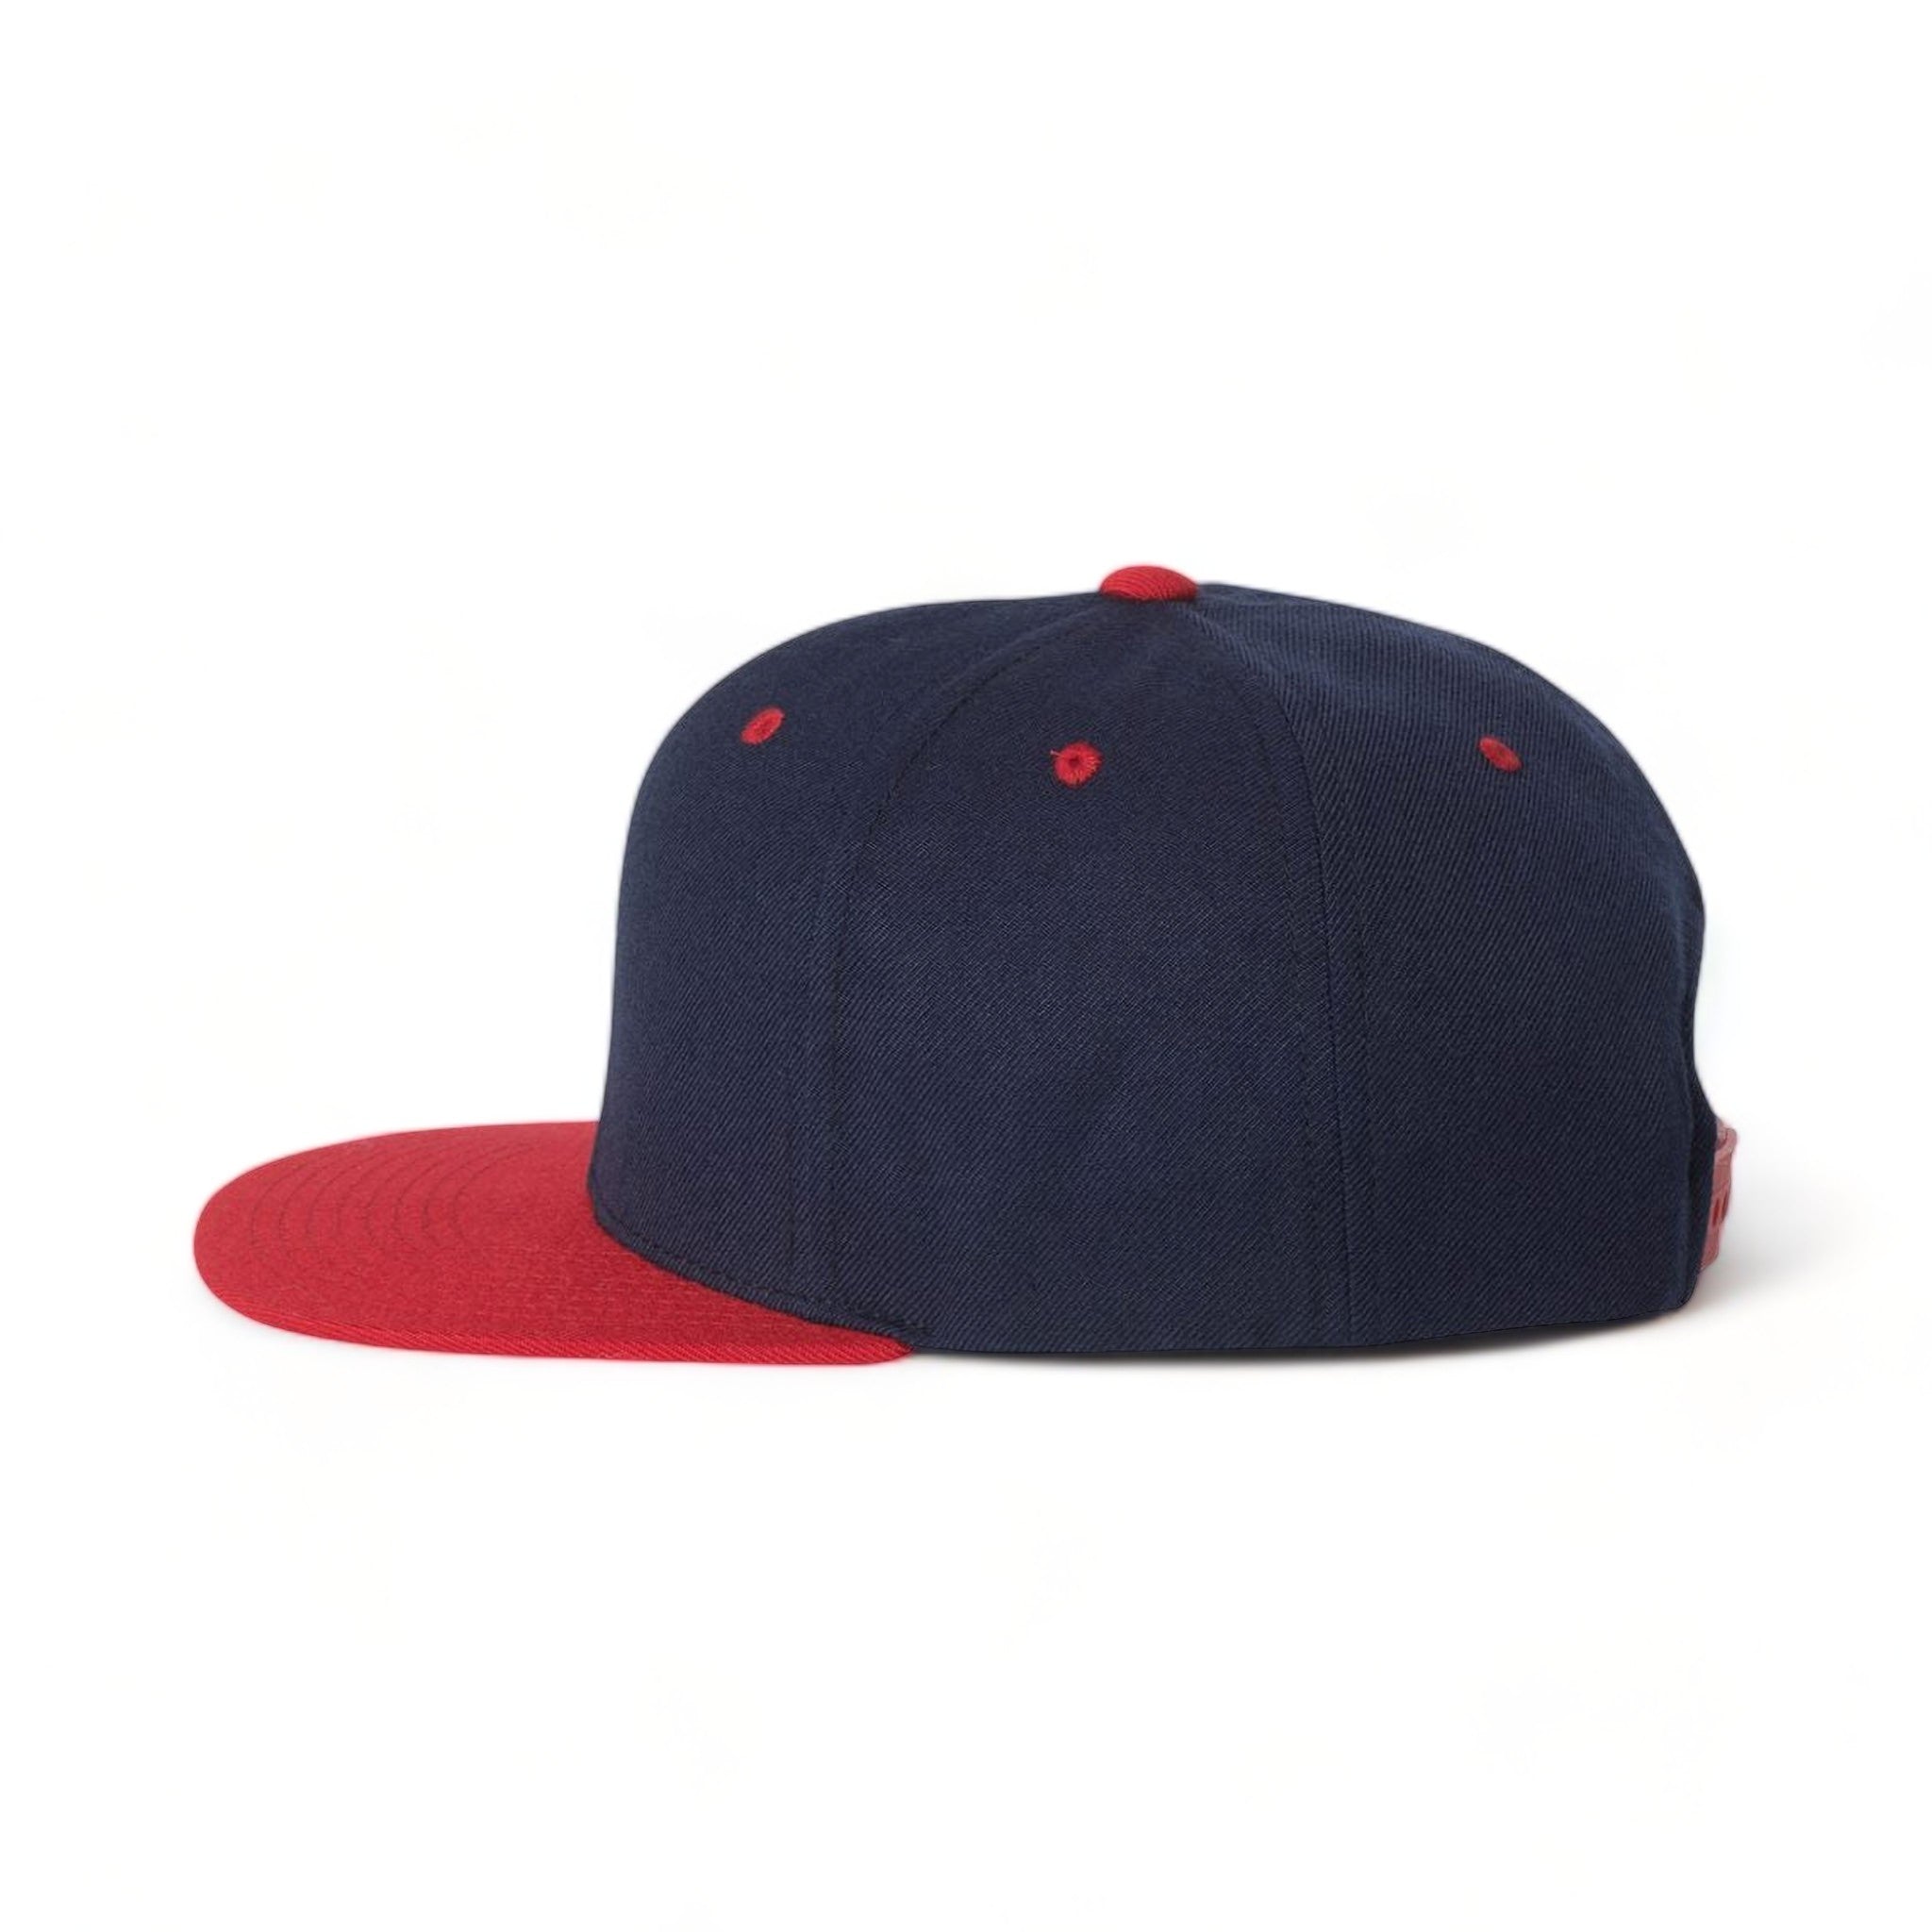 Back view of YP Classics 6089M custom hat in navy and red